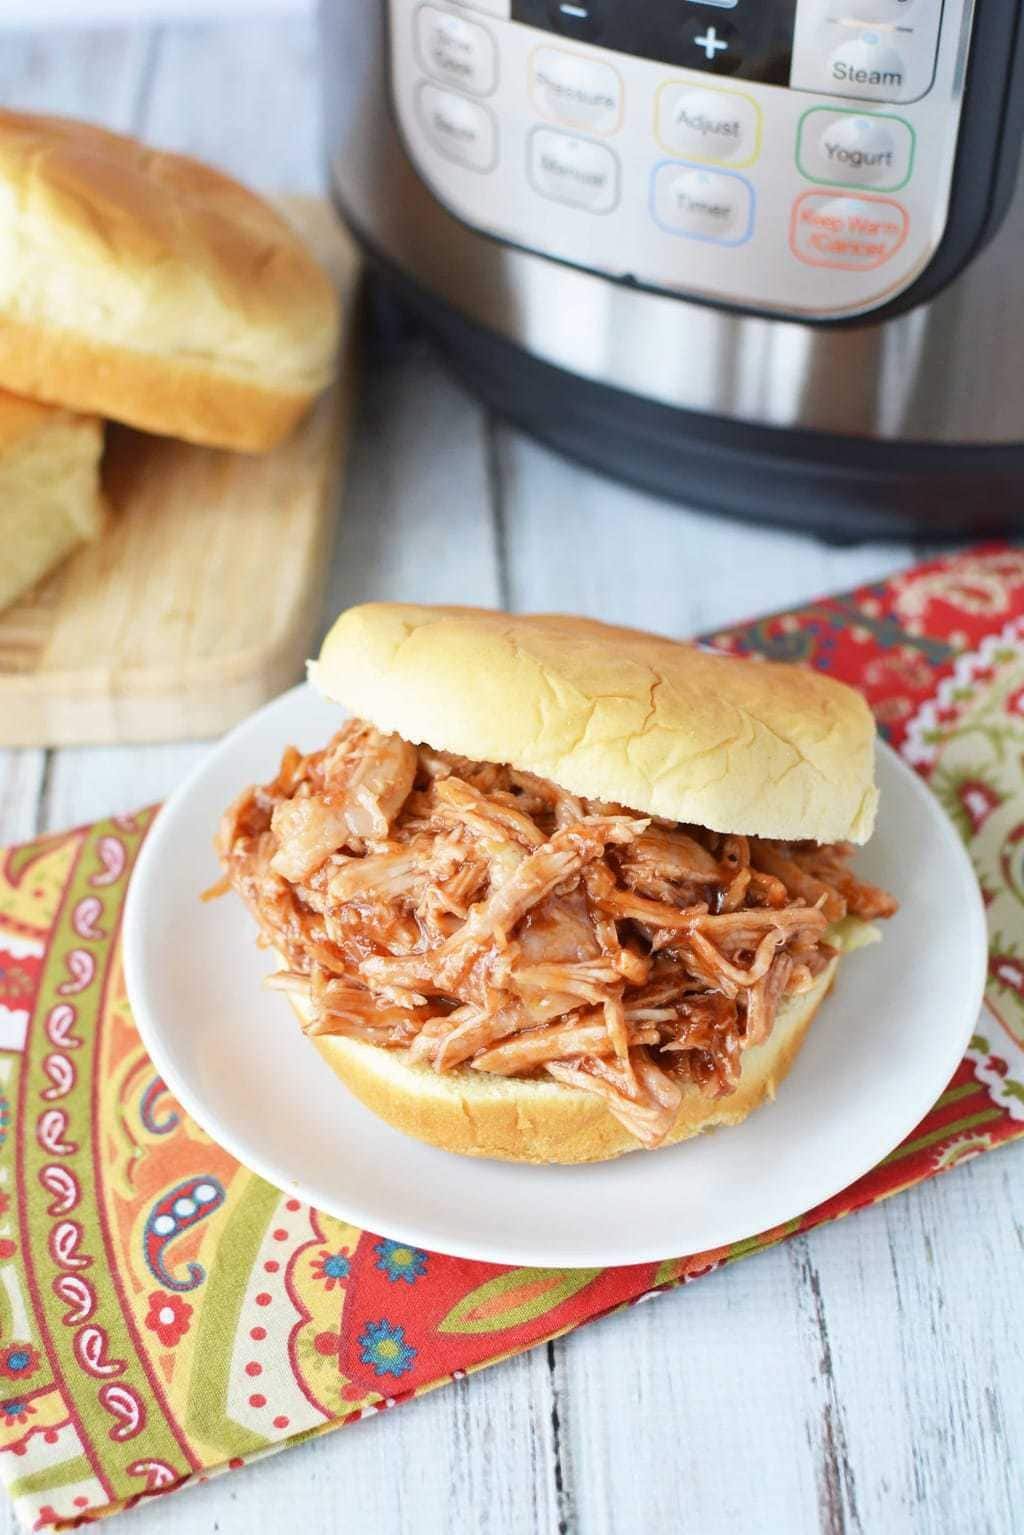 Instant Pot Pulled Pork Recipe - how to make